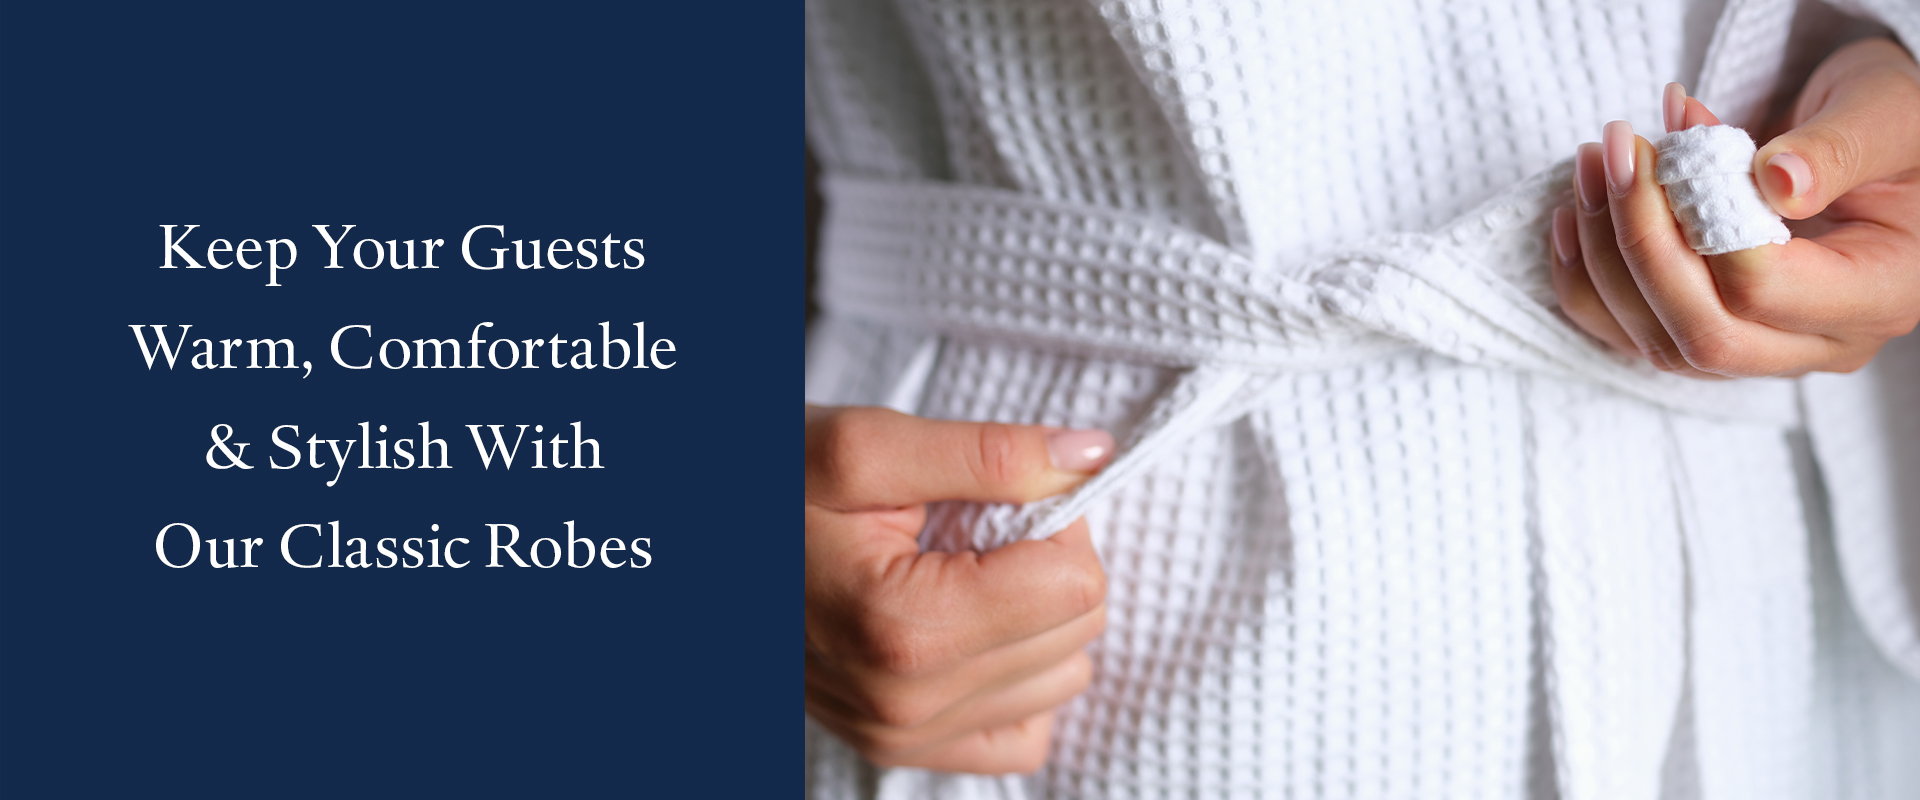 Keep Guests Warm & Stylish with our Robes